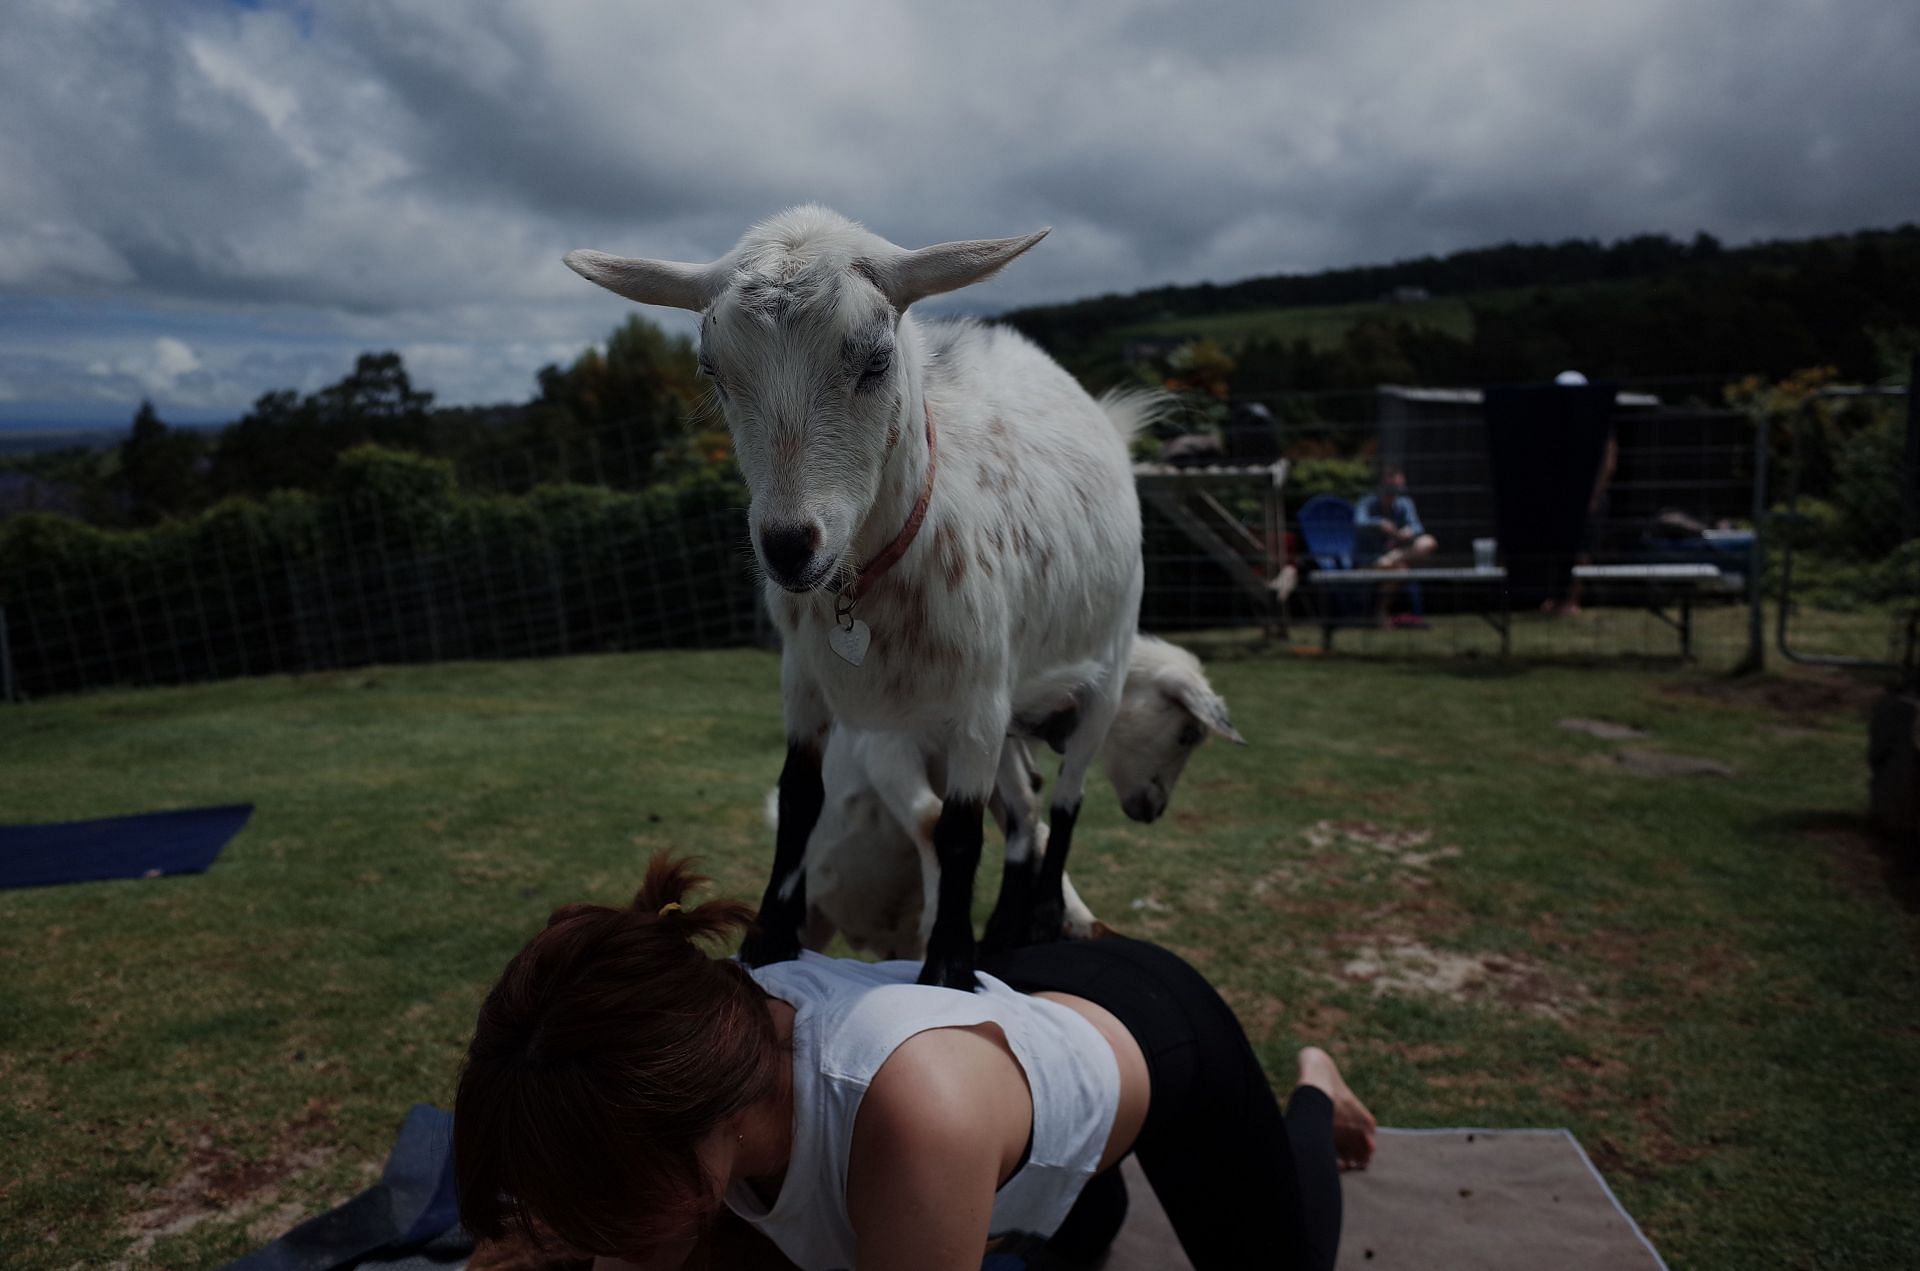 Goat yoga is exactly what it sounds like&mdash;yoga exercises done with actual goats. (Image via Unsplash/ Vivian Cai)